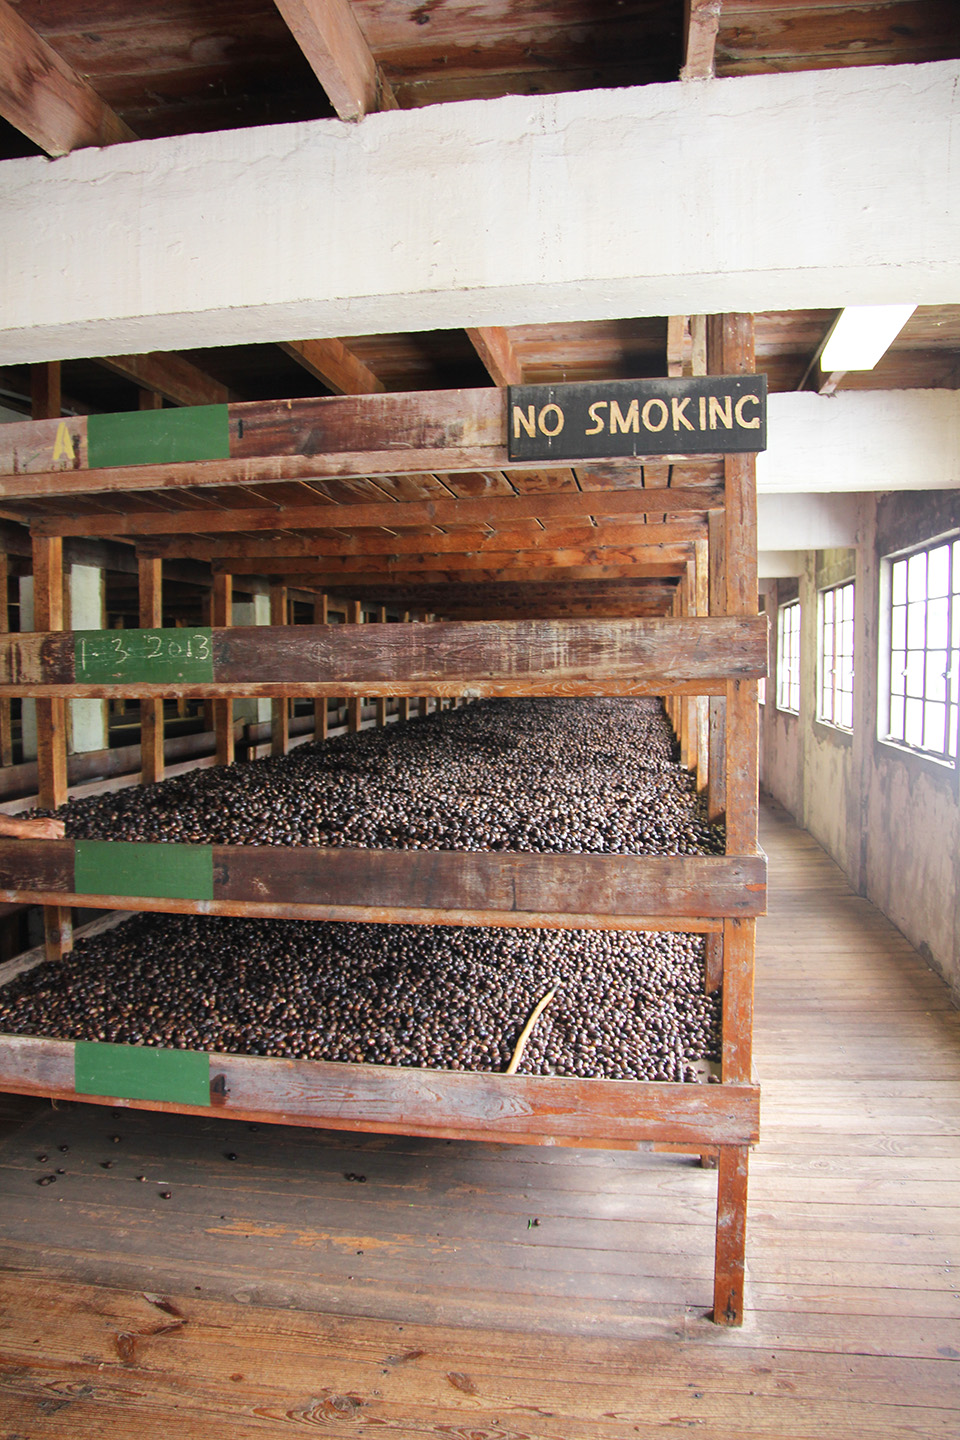 Bins containing thousands of nutmeg beans.